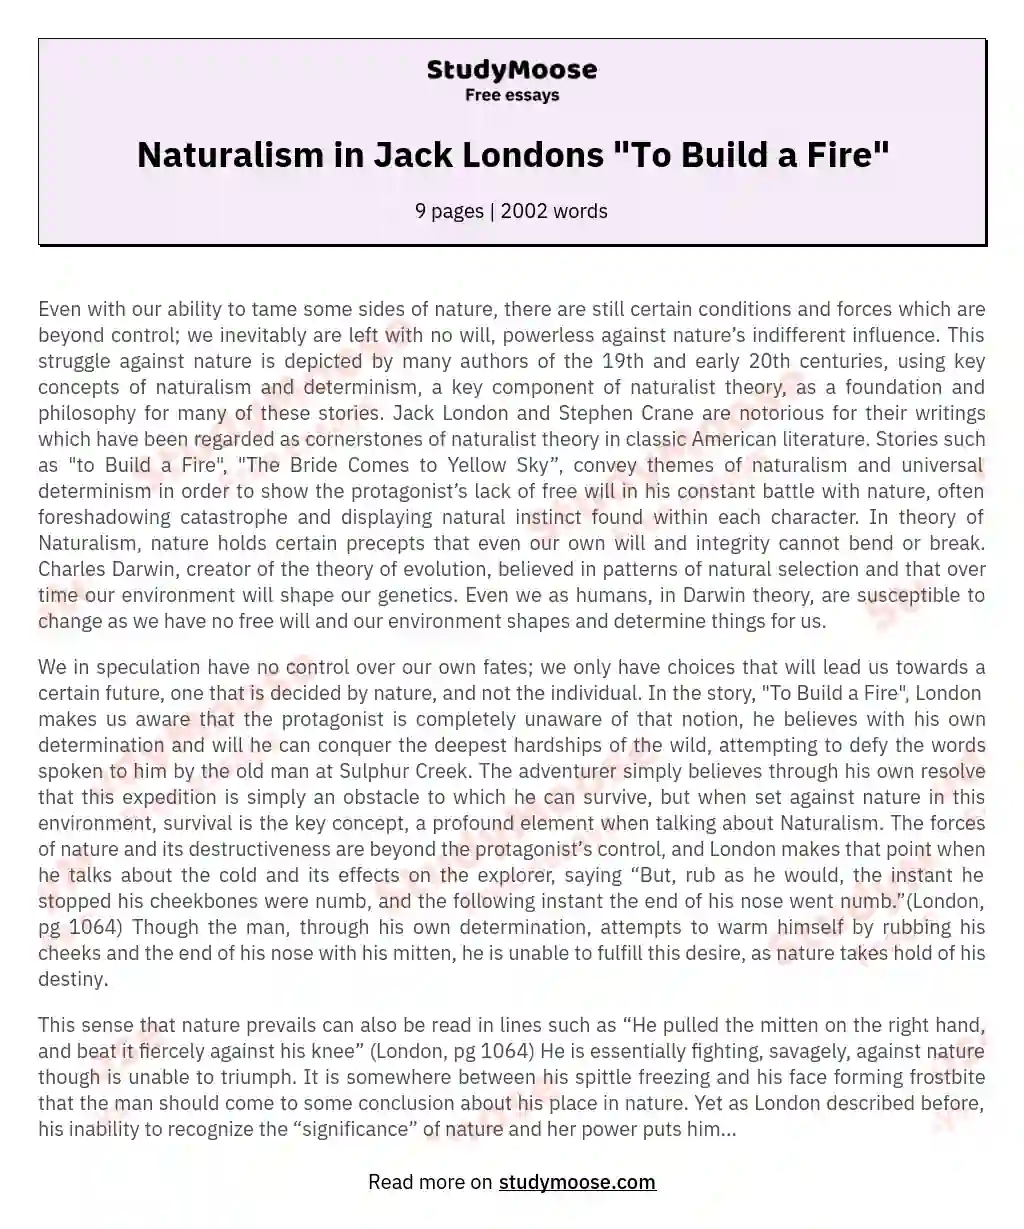 Naturalism in Jack Londons "To Build a Fire" essay